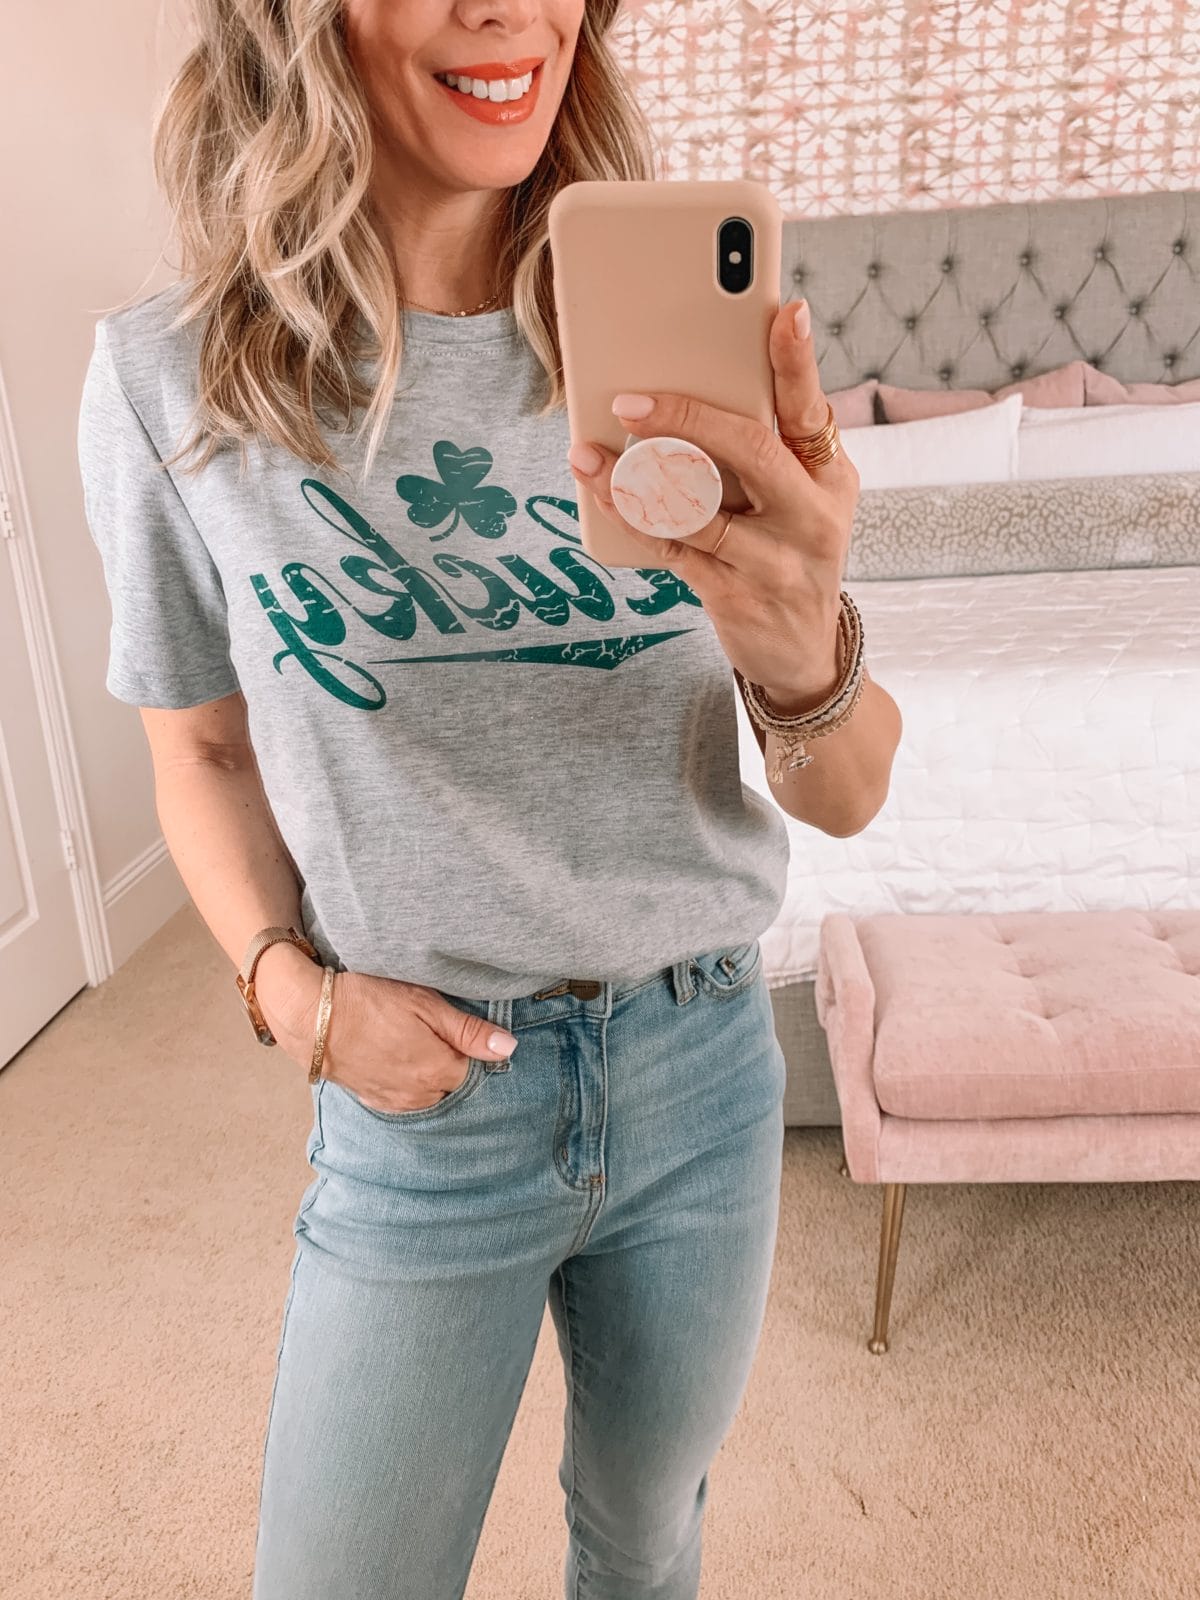 Amazon Fashion Faves, Lucky tee, Jeans, Booties 